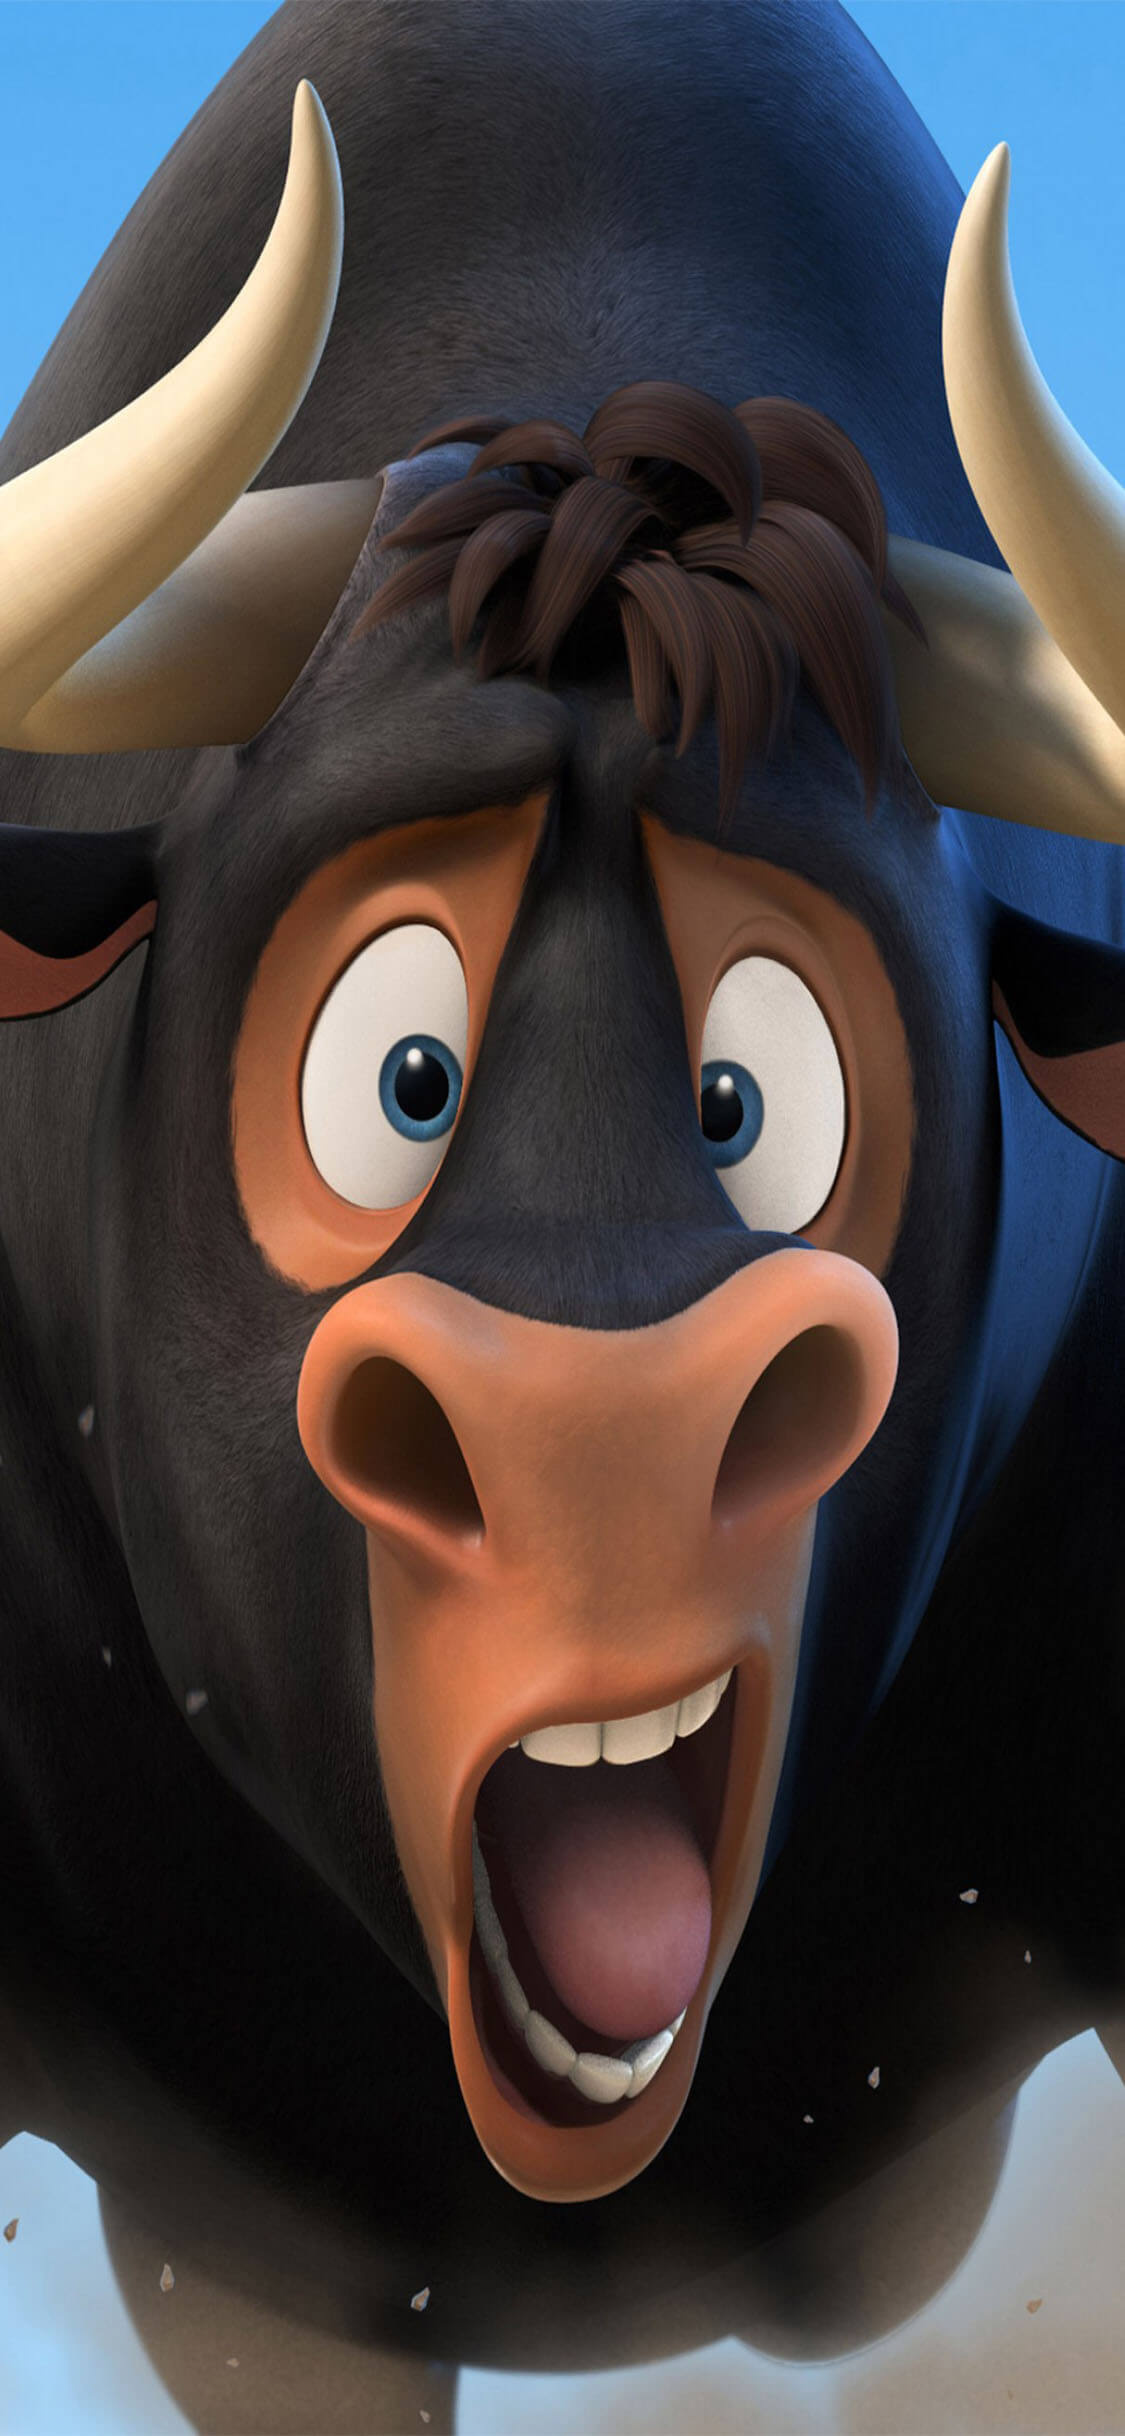 Ferdinand Animation, Cartoon wallpapers, Optimized for iPhone, Animated fun, 1130x2440 HD Phone